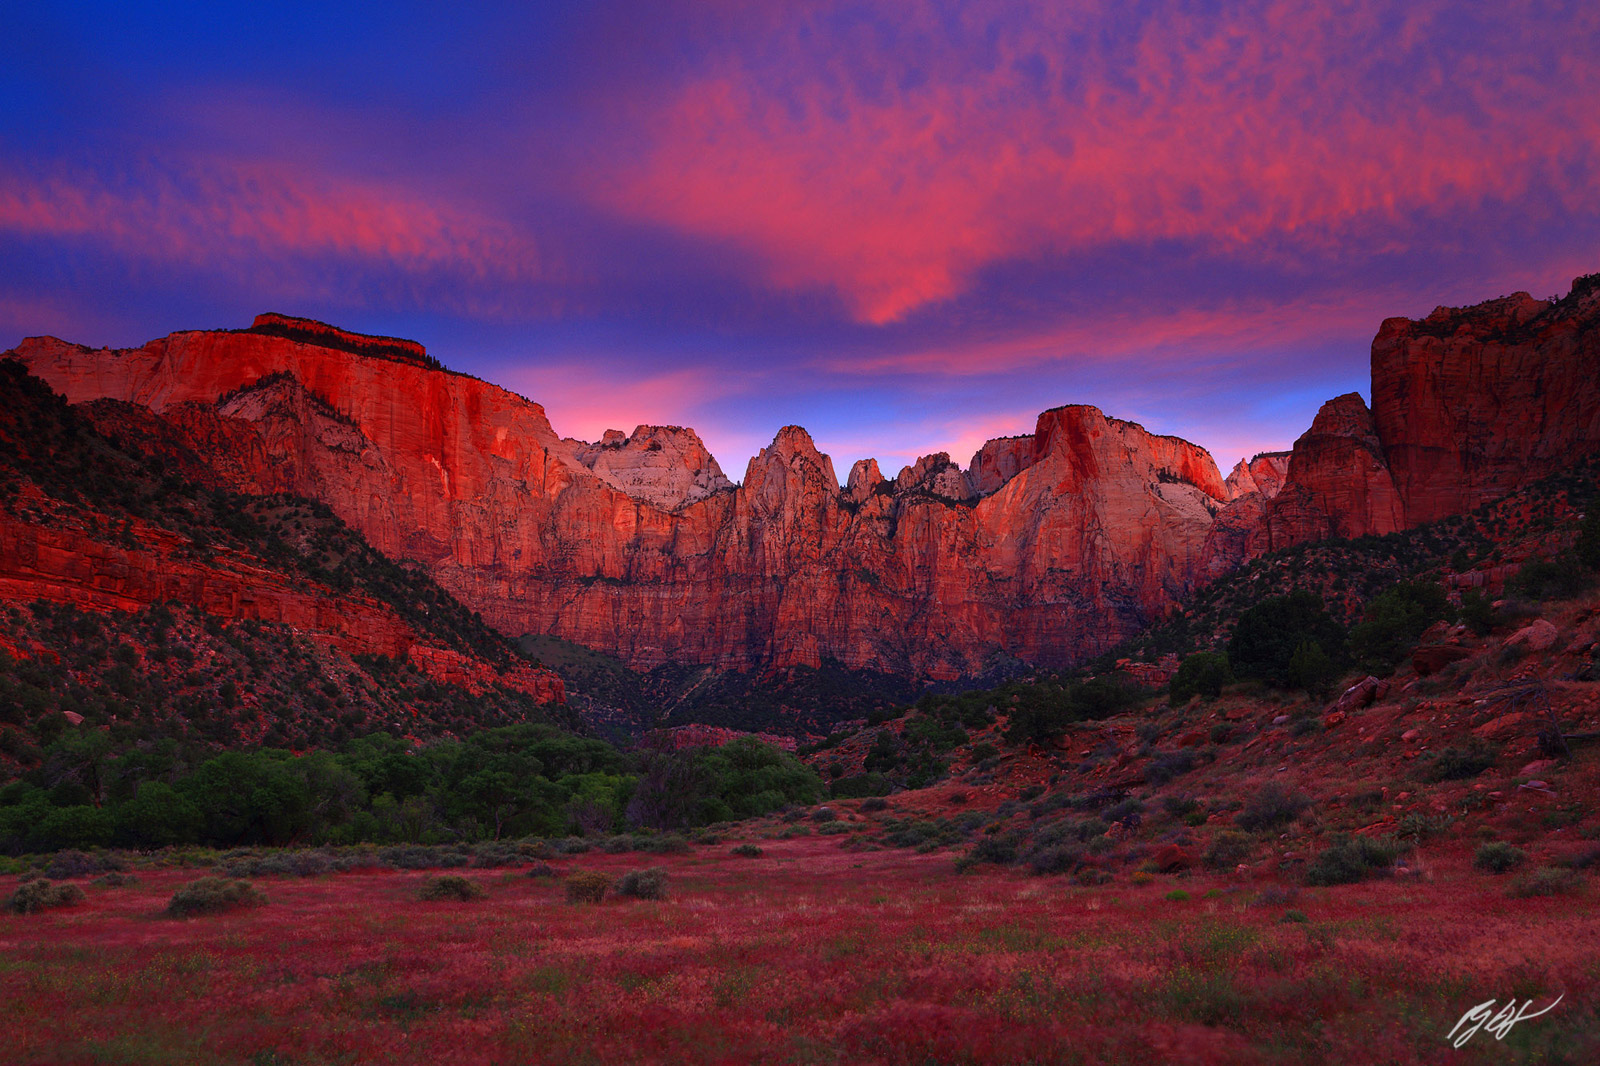 Sunrise on the Towers of the Virgin in Zion National Park in Utah